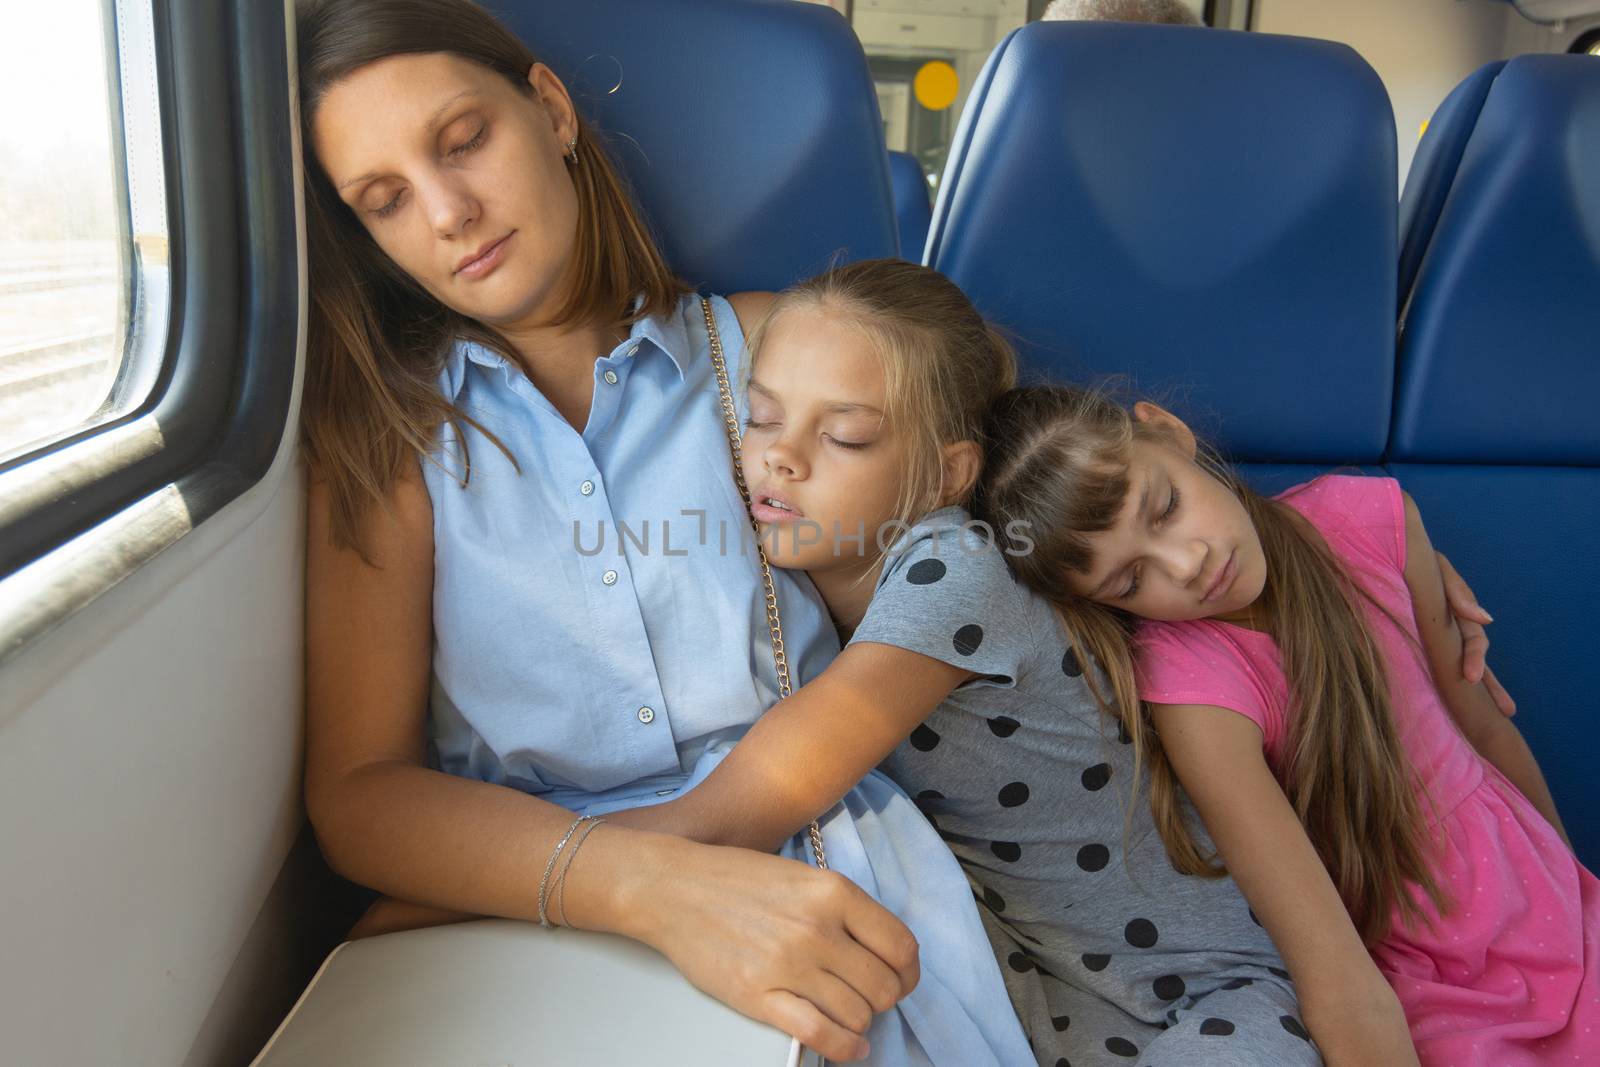 Mom and two daughters fell asleep in an electric train car